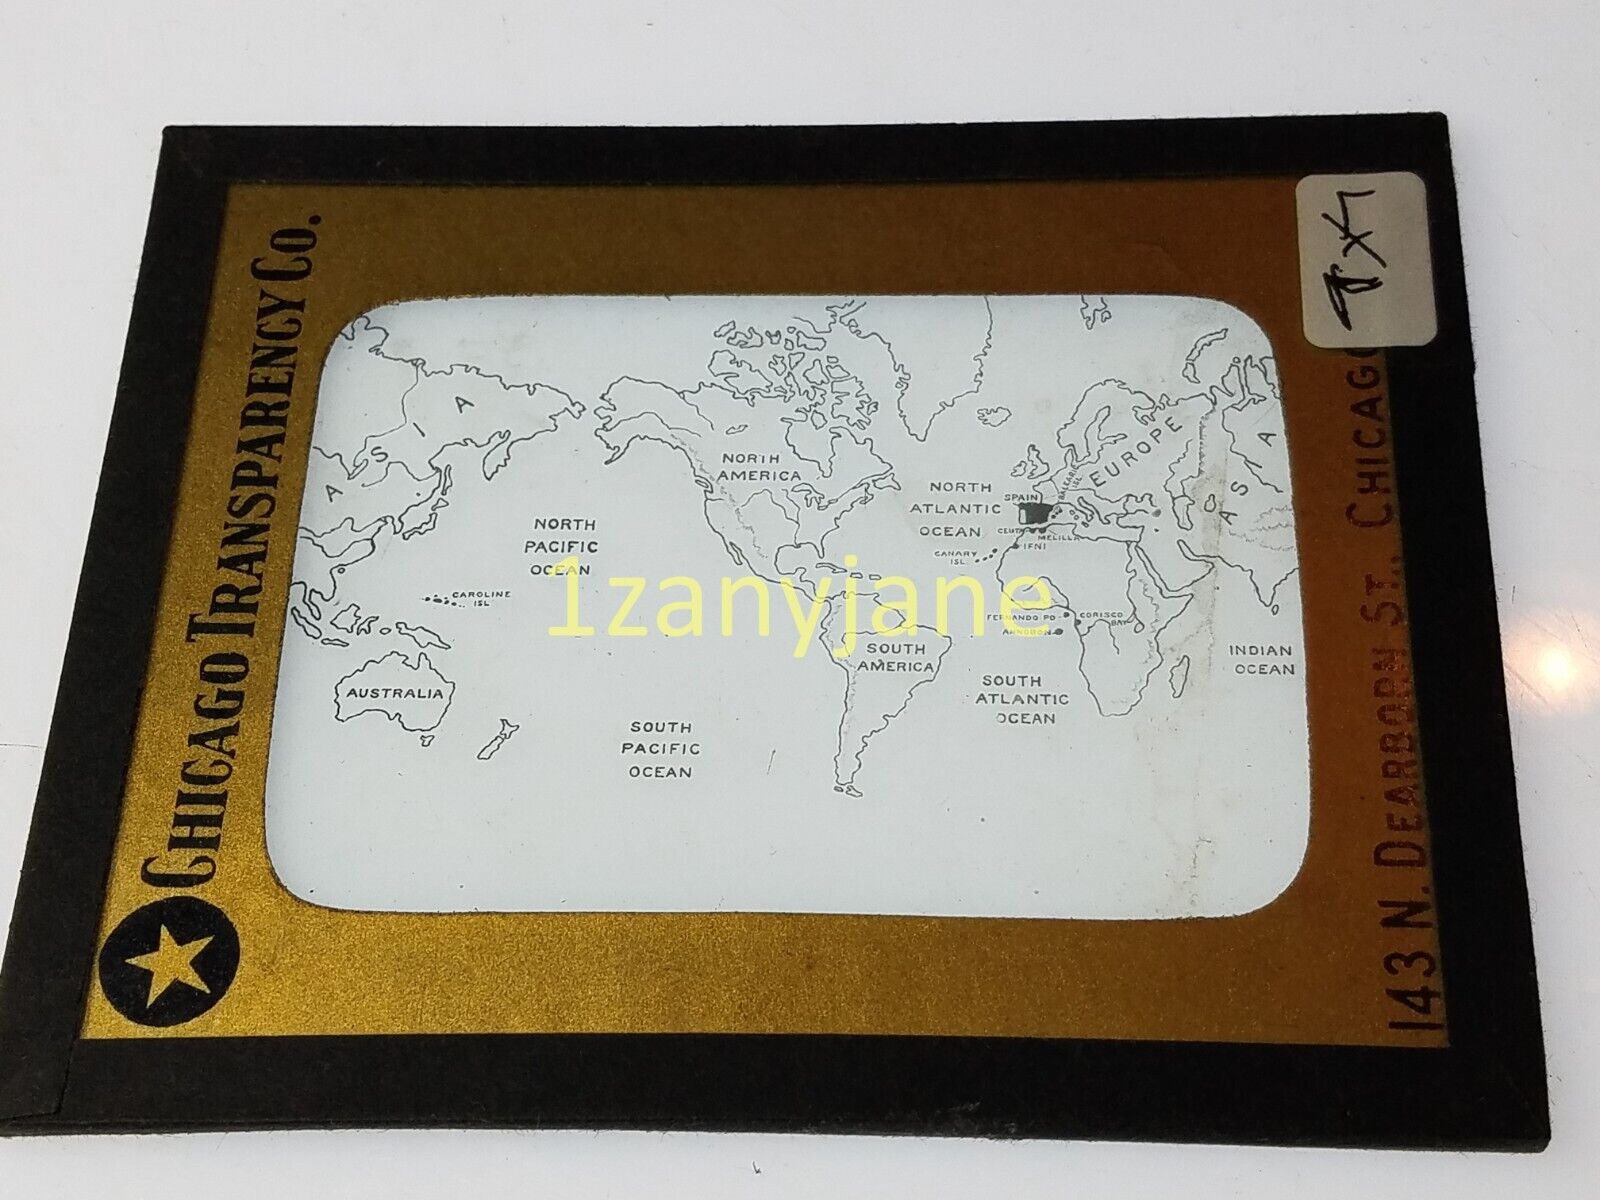 LXL Glass Magic Lantern Slide Photo OUTLINES OF CONTINENTS AND OCEANS IDENTIFIED